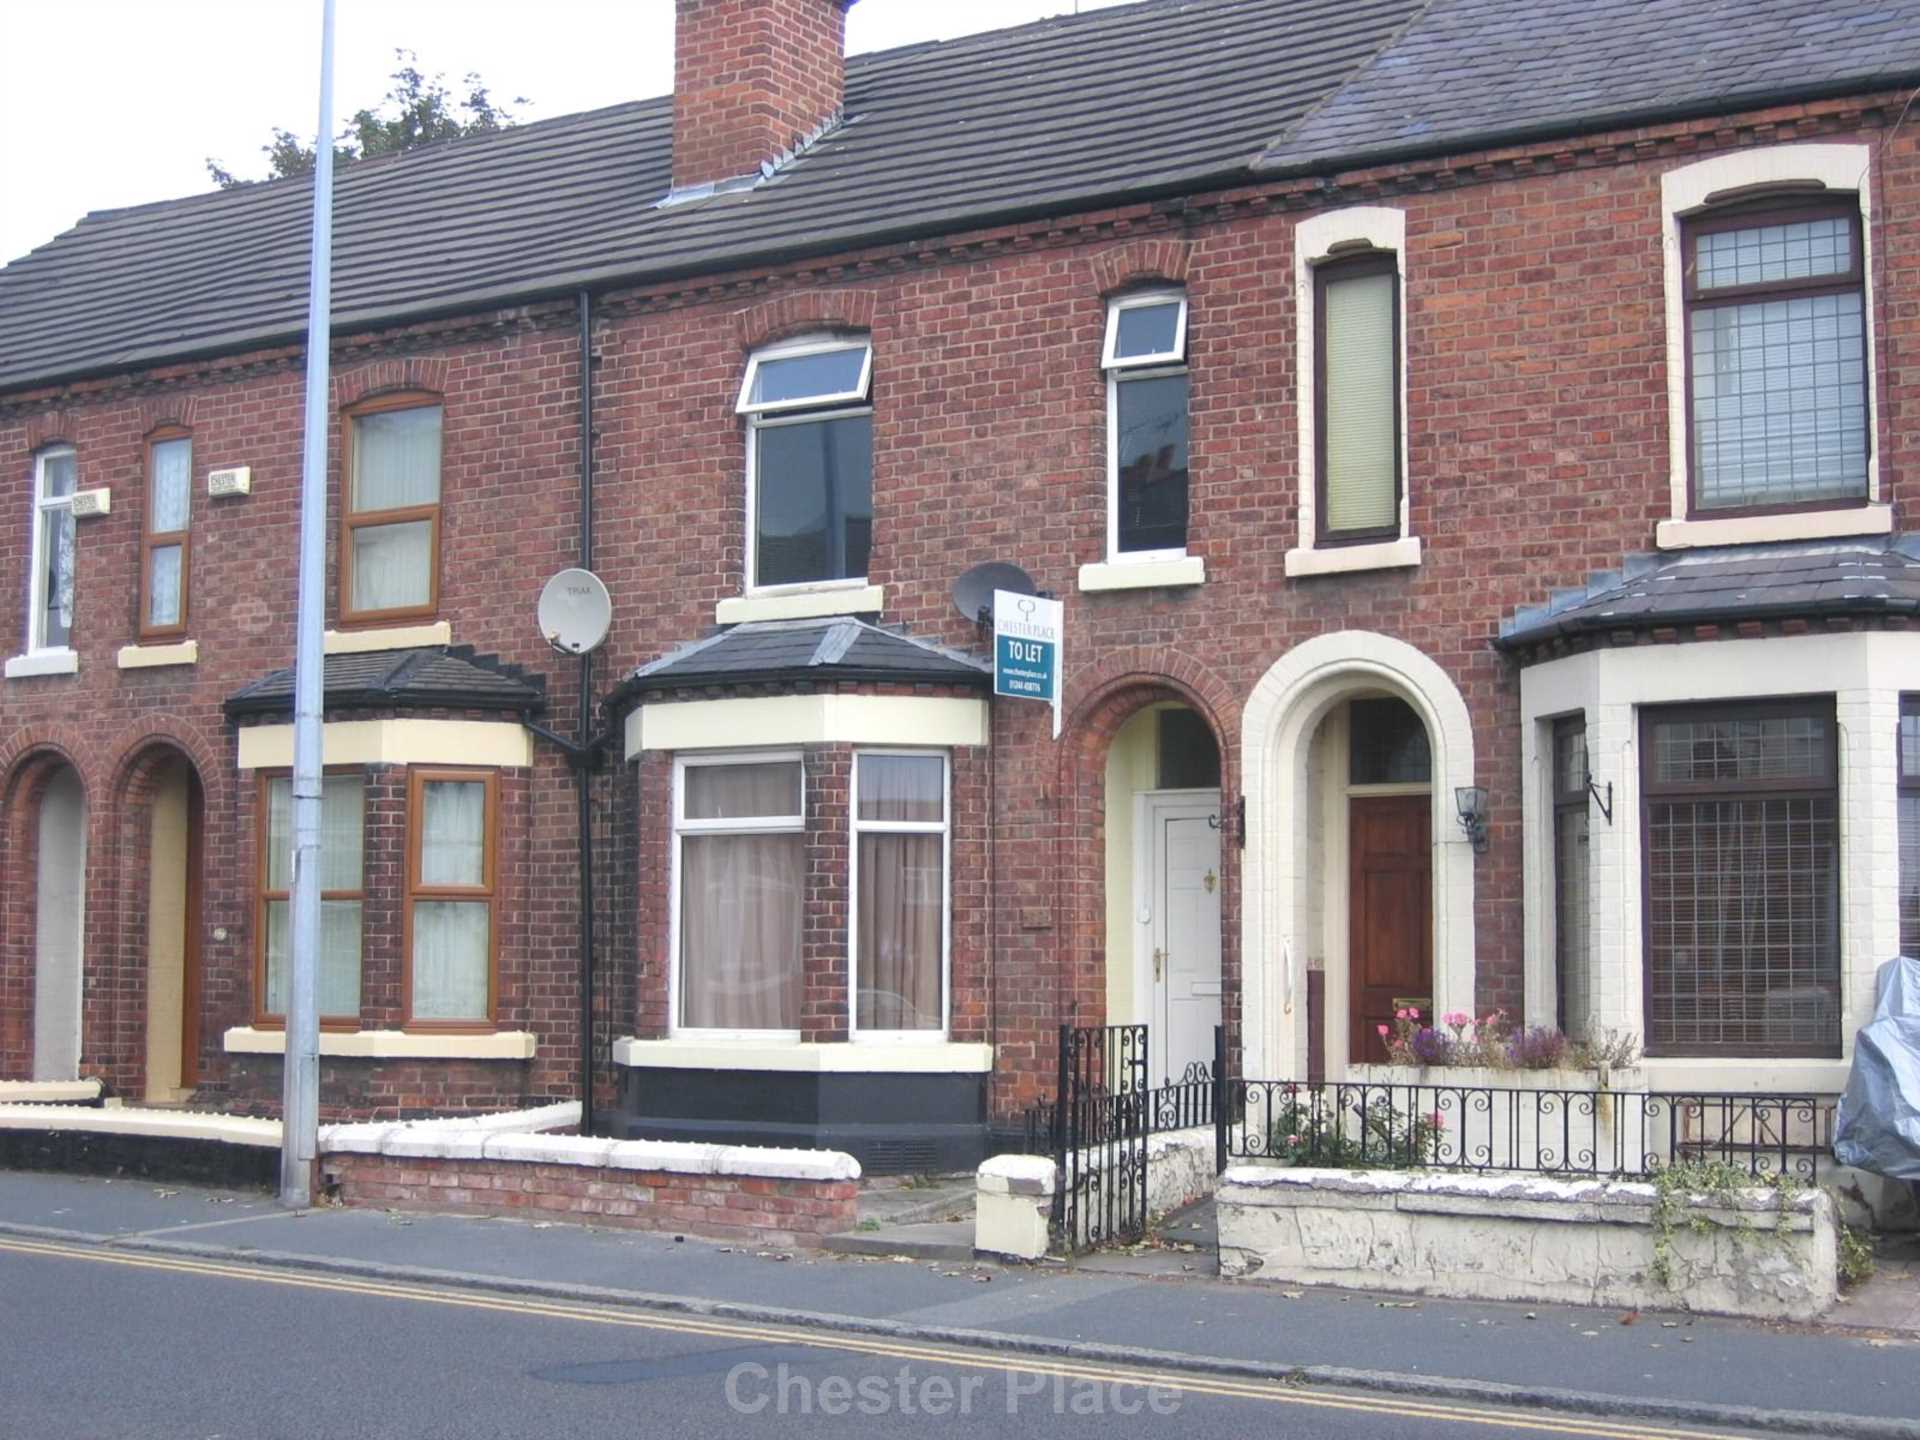 4 bed House (unspecified) for rent in Chester. From Chester Place